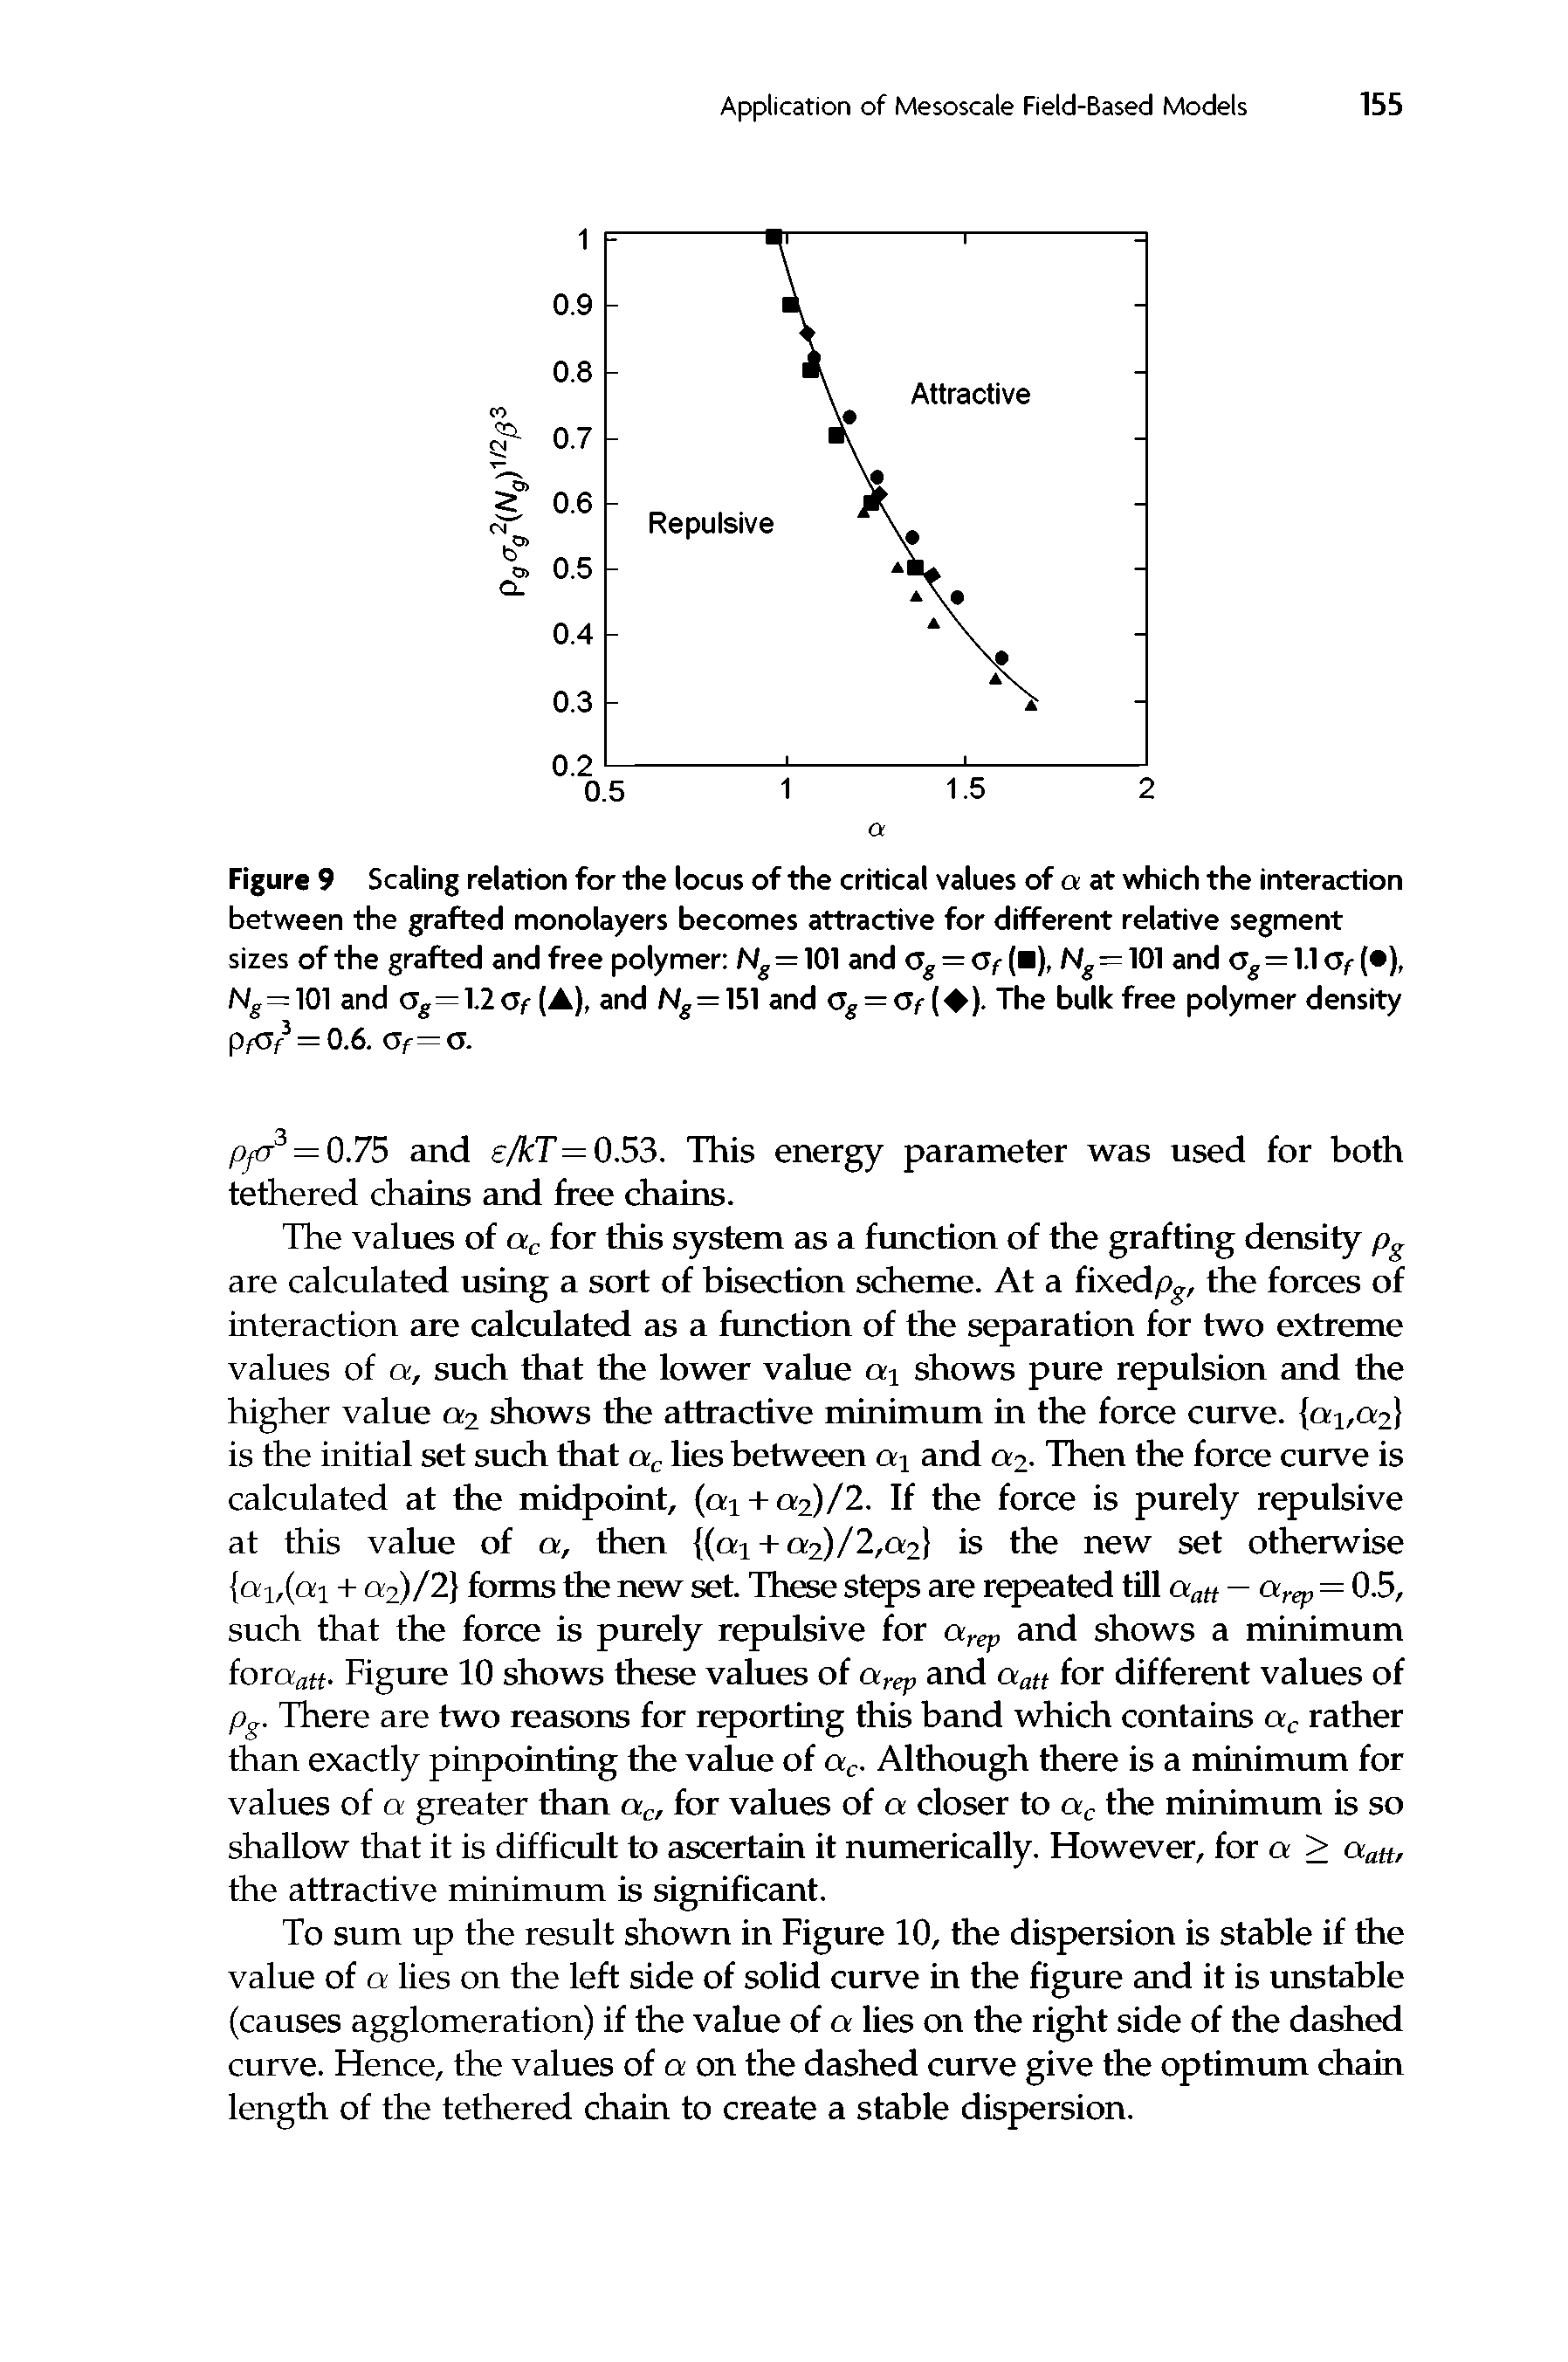 Figure 9 Scaling relation for the locus of the critical values of a at which the interaction between the grafted monolayers becomes attractive for different relative segment sizes of the grafted and free polymer Ng = 101 and Gg = Of ( ), Ng — 101 and og=1.1 Of ( ), Ng=101 and Gg HCf (A), and Ng=151 and <3g = Of ( ). The bulk free polymer density...